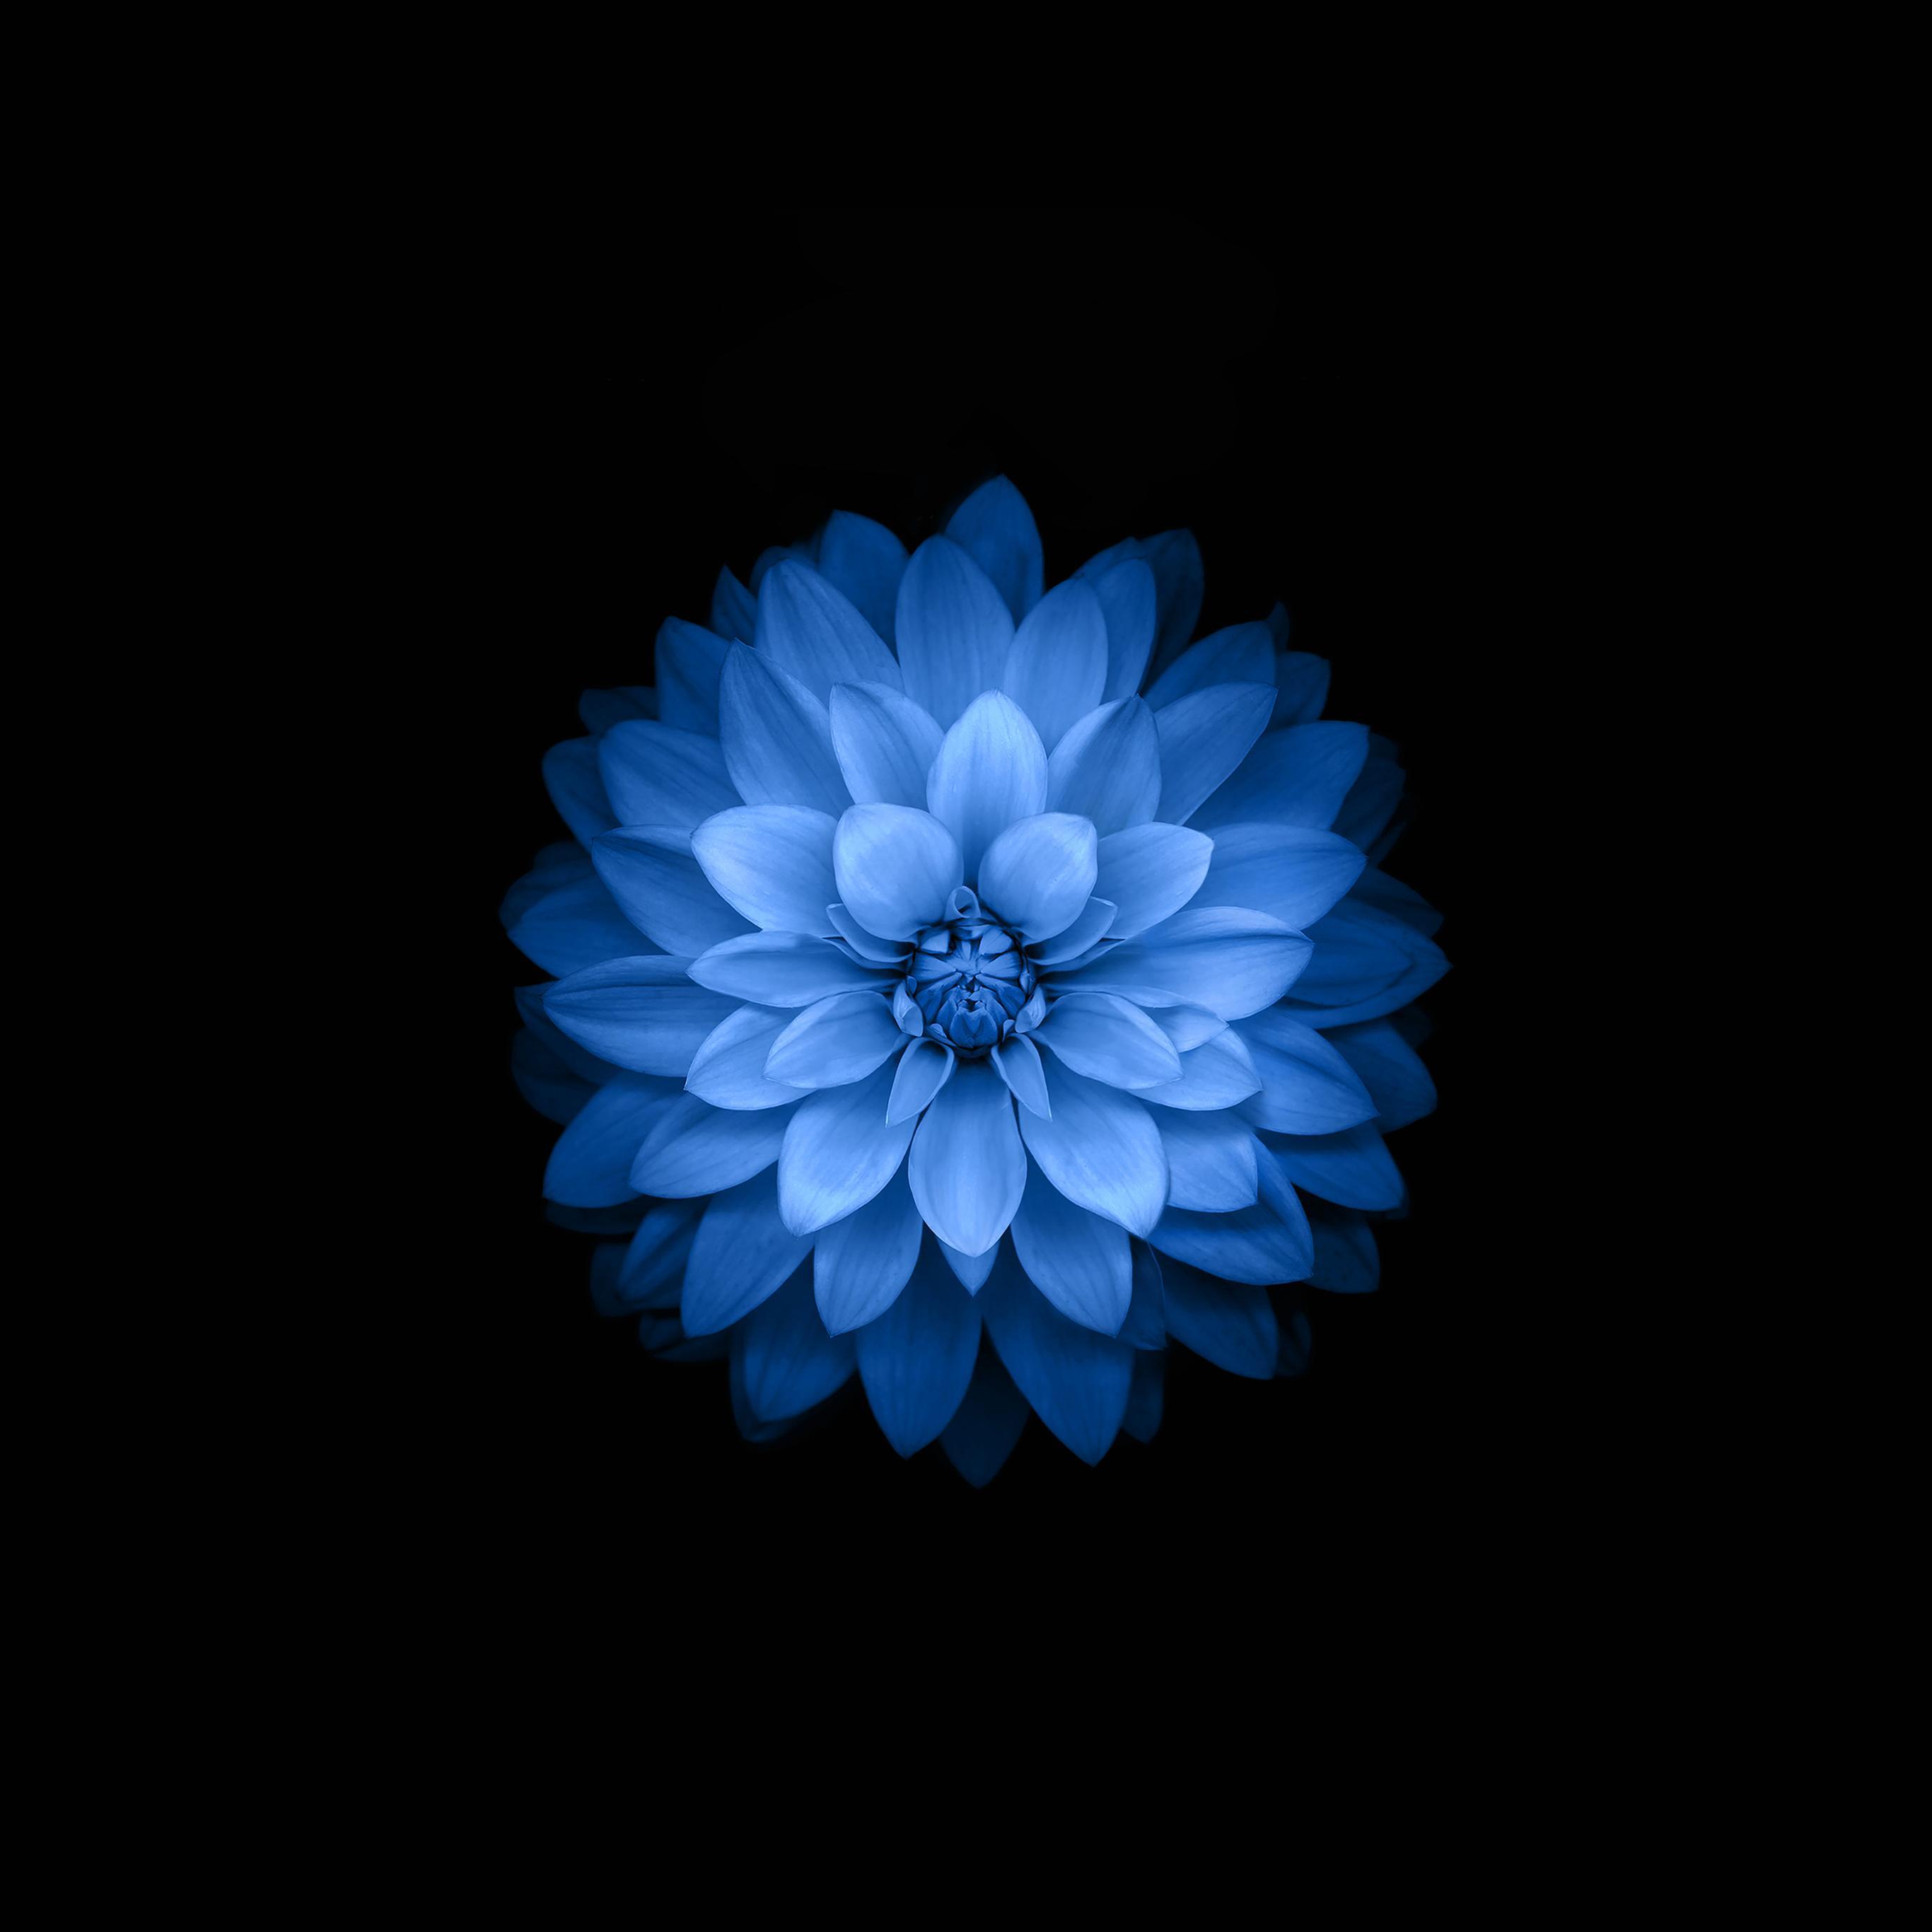 Amoled Live wallpaper, Background 4k: Darknex for Android